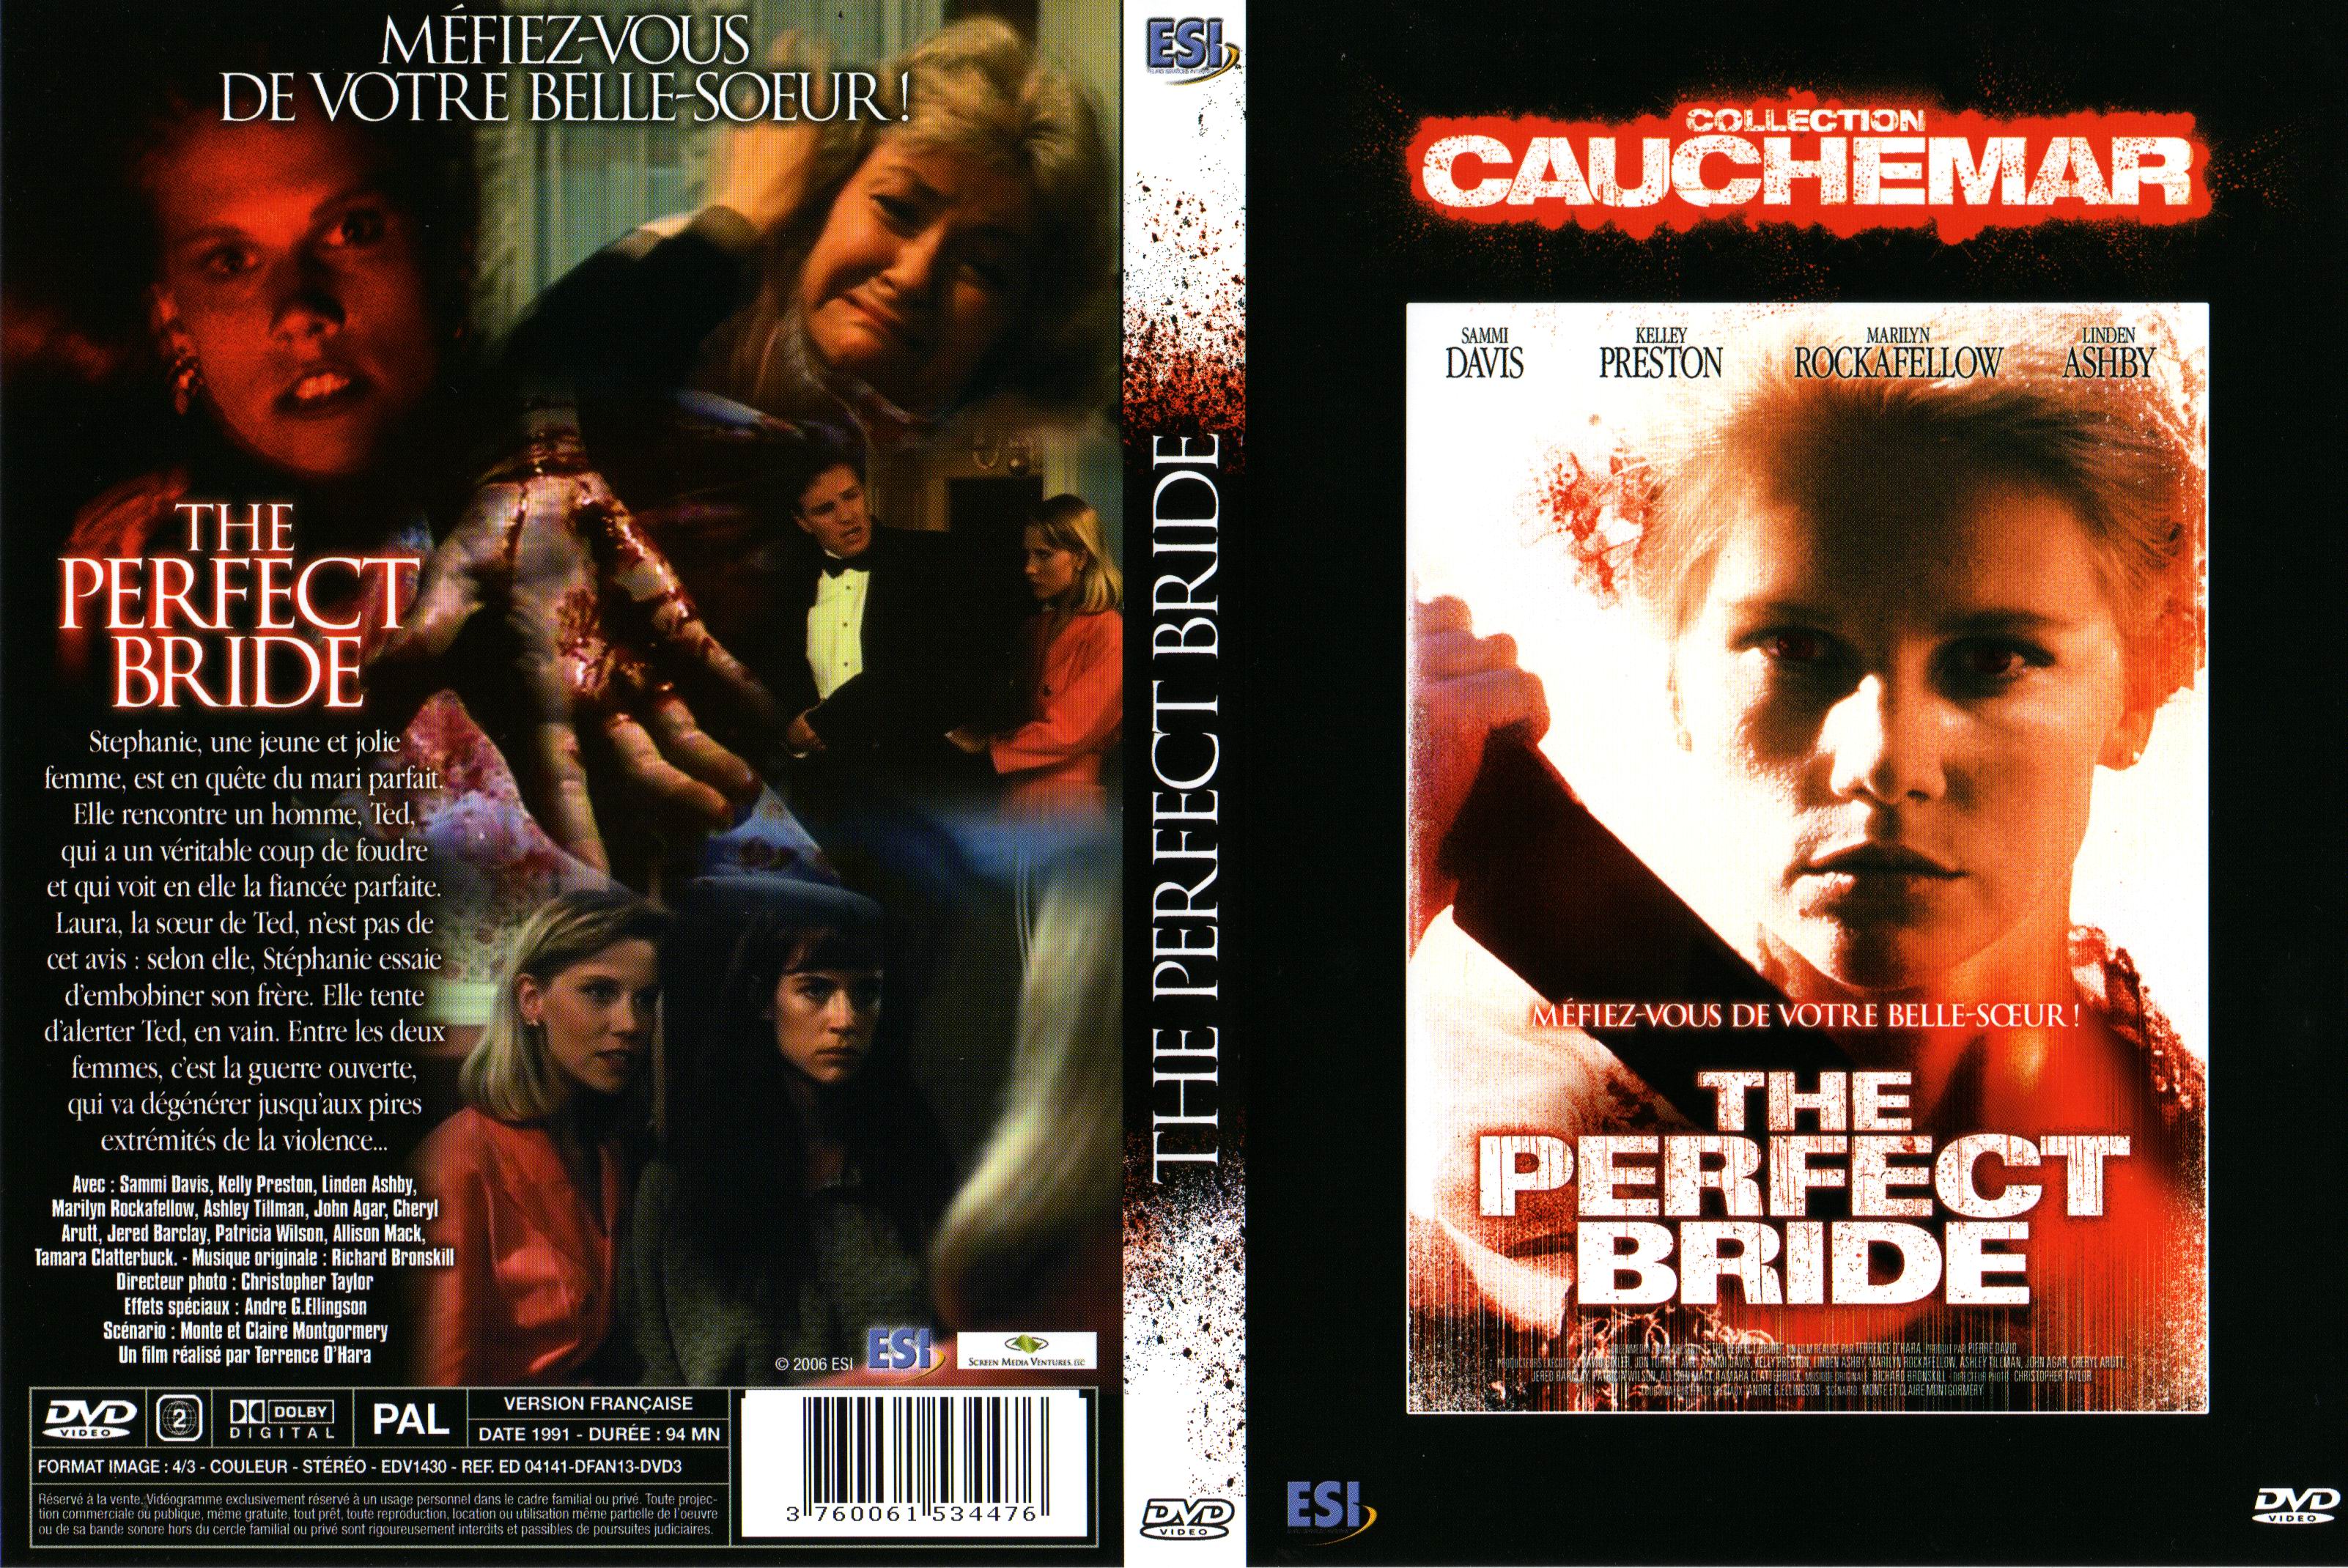 Jaquette DVD The perfect bride